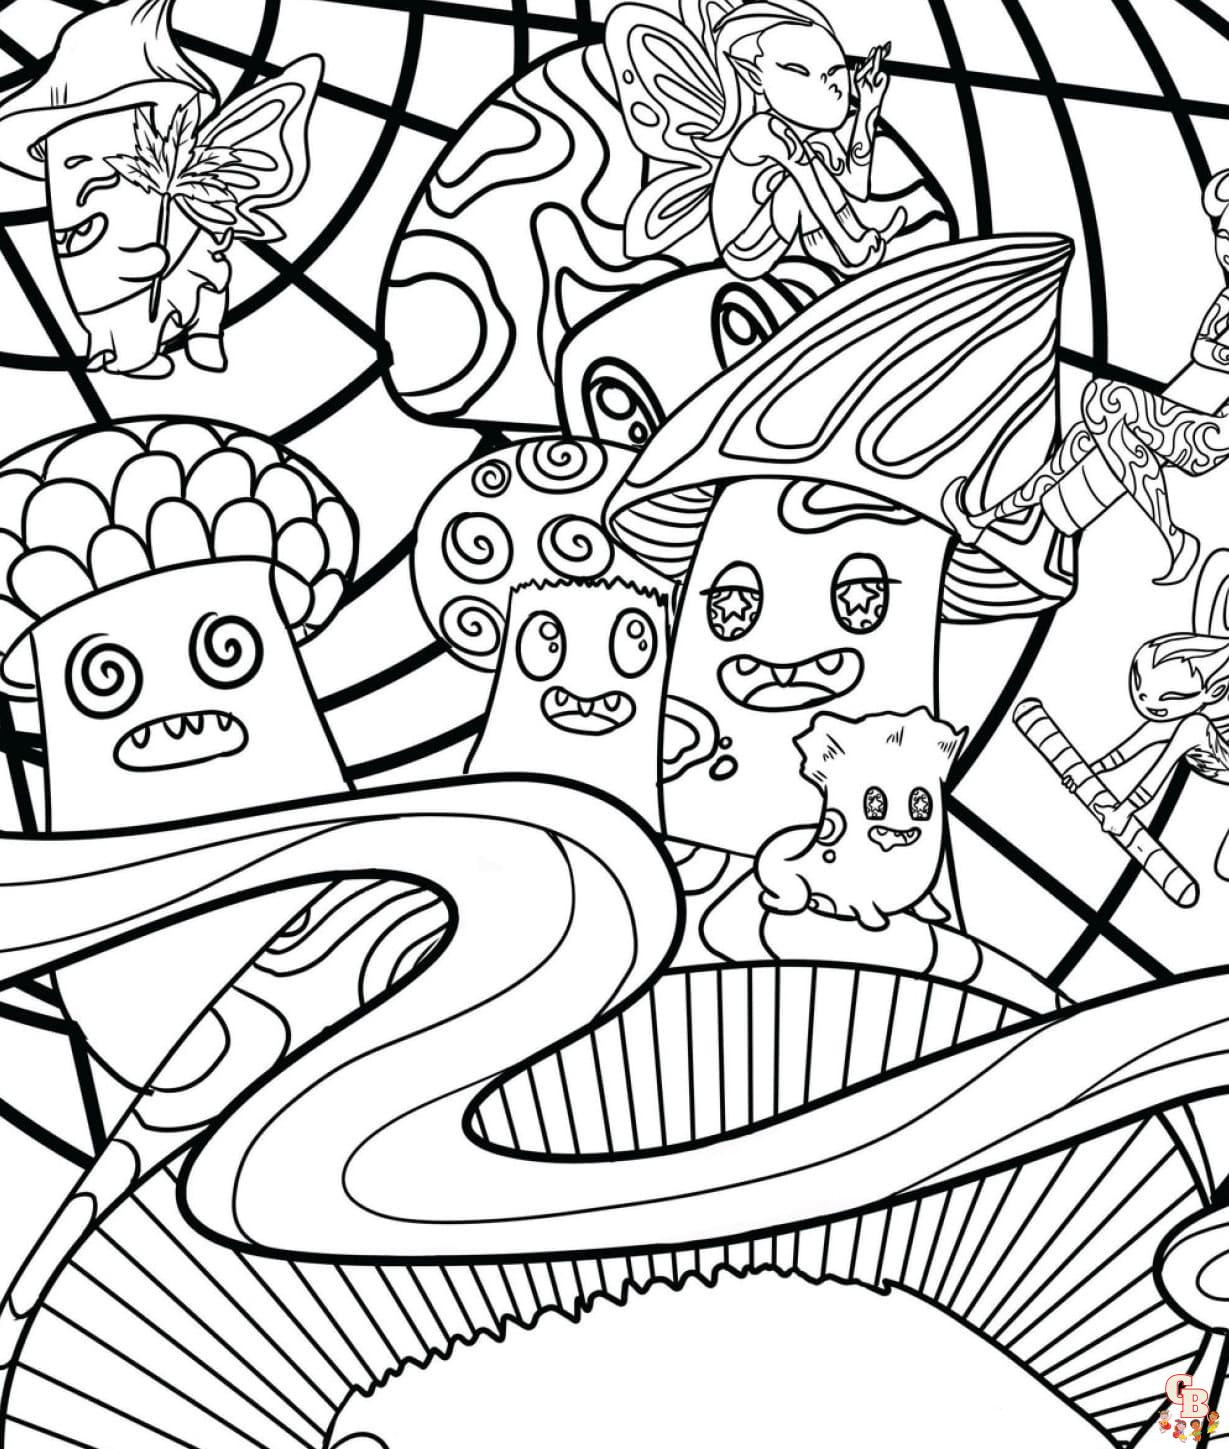 Free Stoner coloring pages for Adults